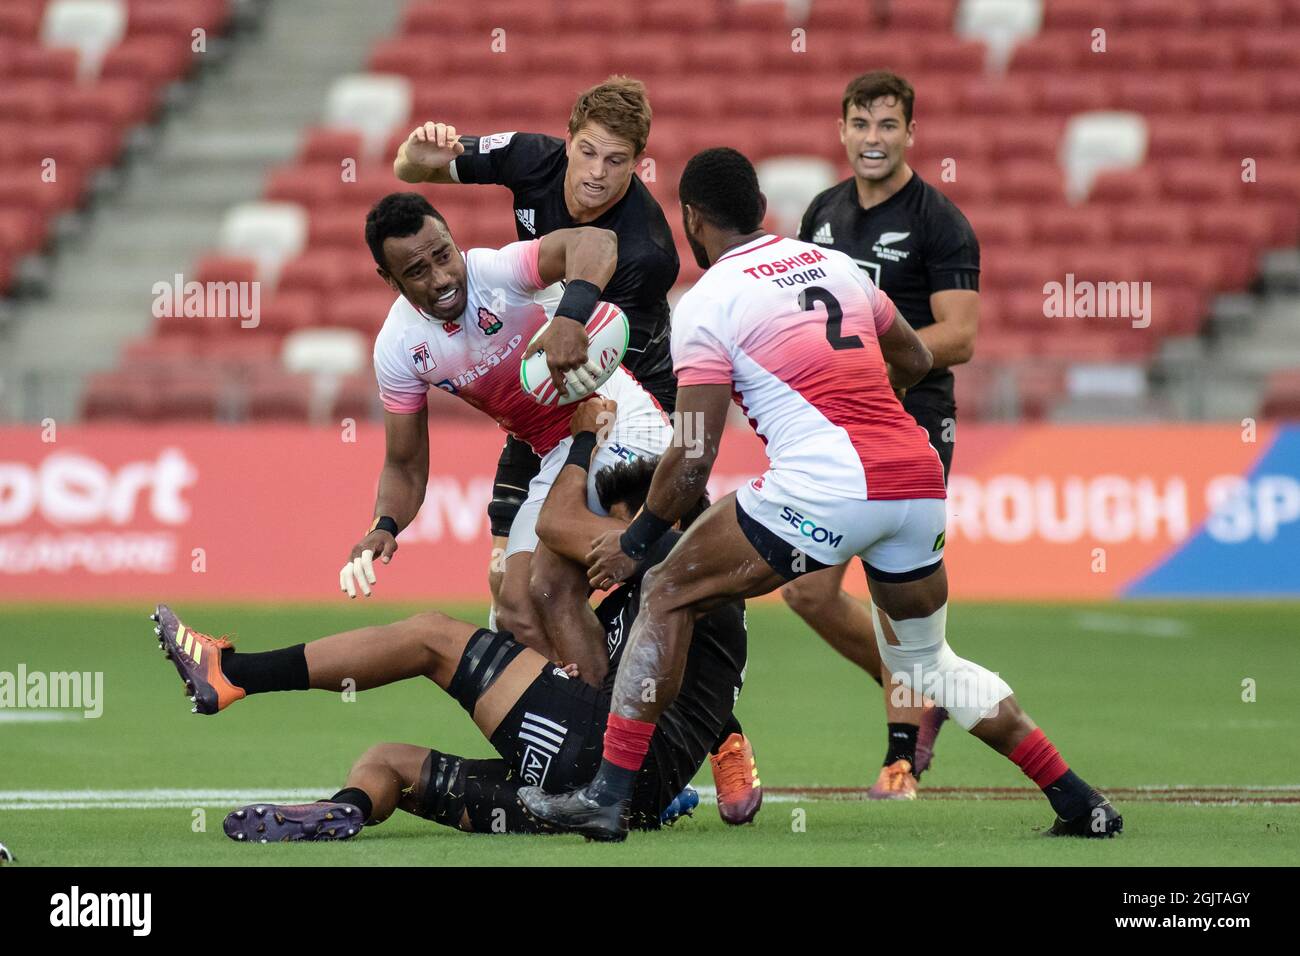 SINGAPORE-APRIL 13:Japan 7s Team (white/red) plays against New Zealand 7s team (black) during Day 1 of HSBC World Rugby Singapore Sevens on April 13, 2019 at National Stadium in Singapore Stock Photo